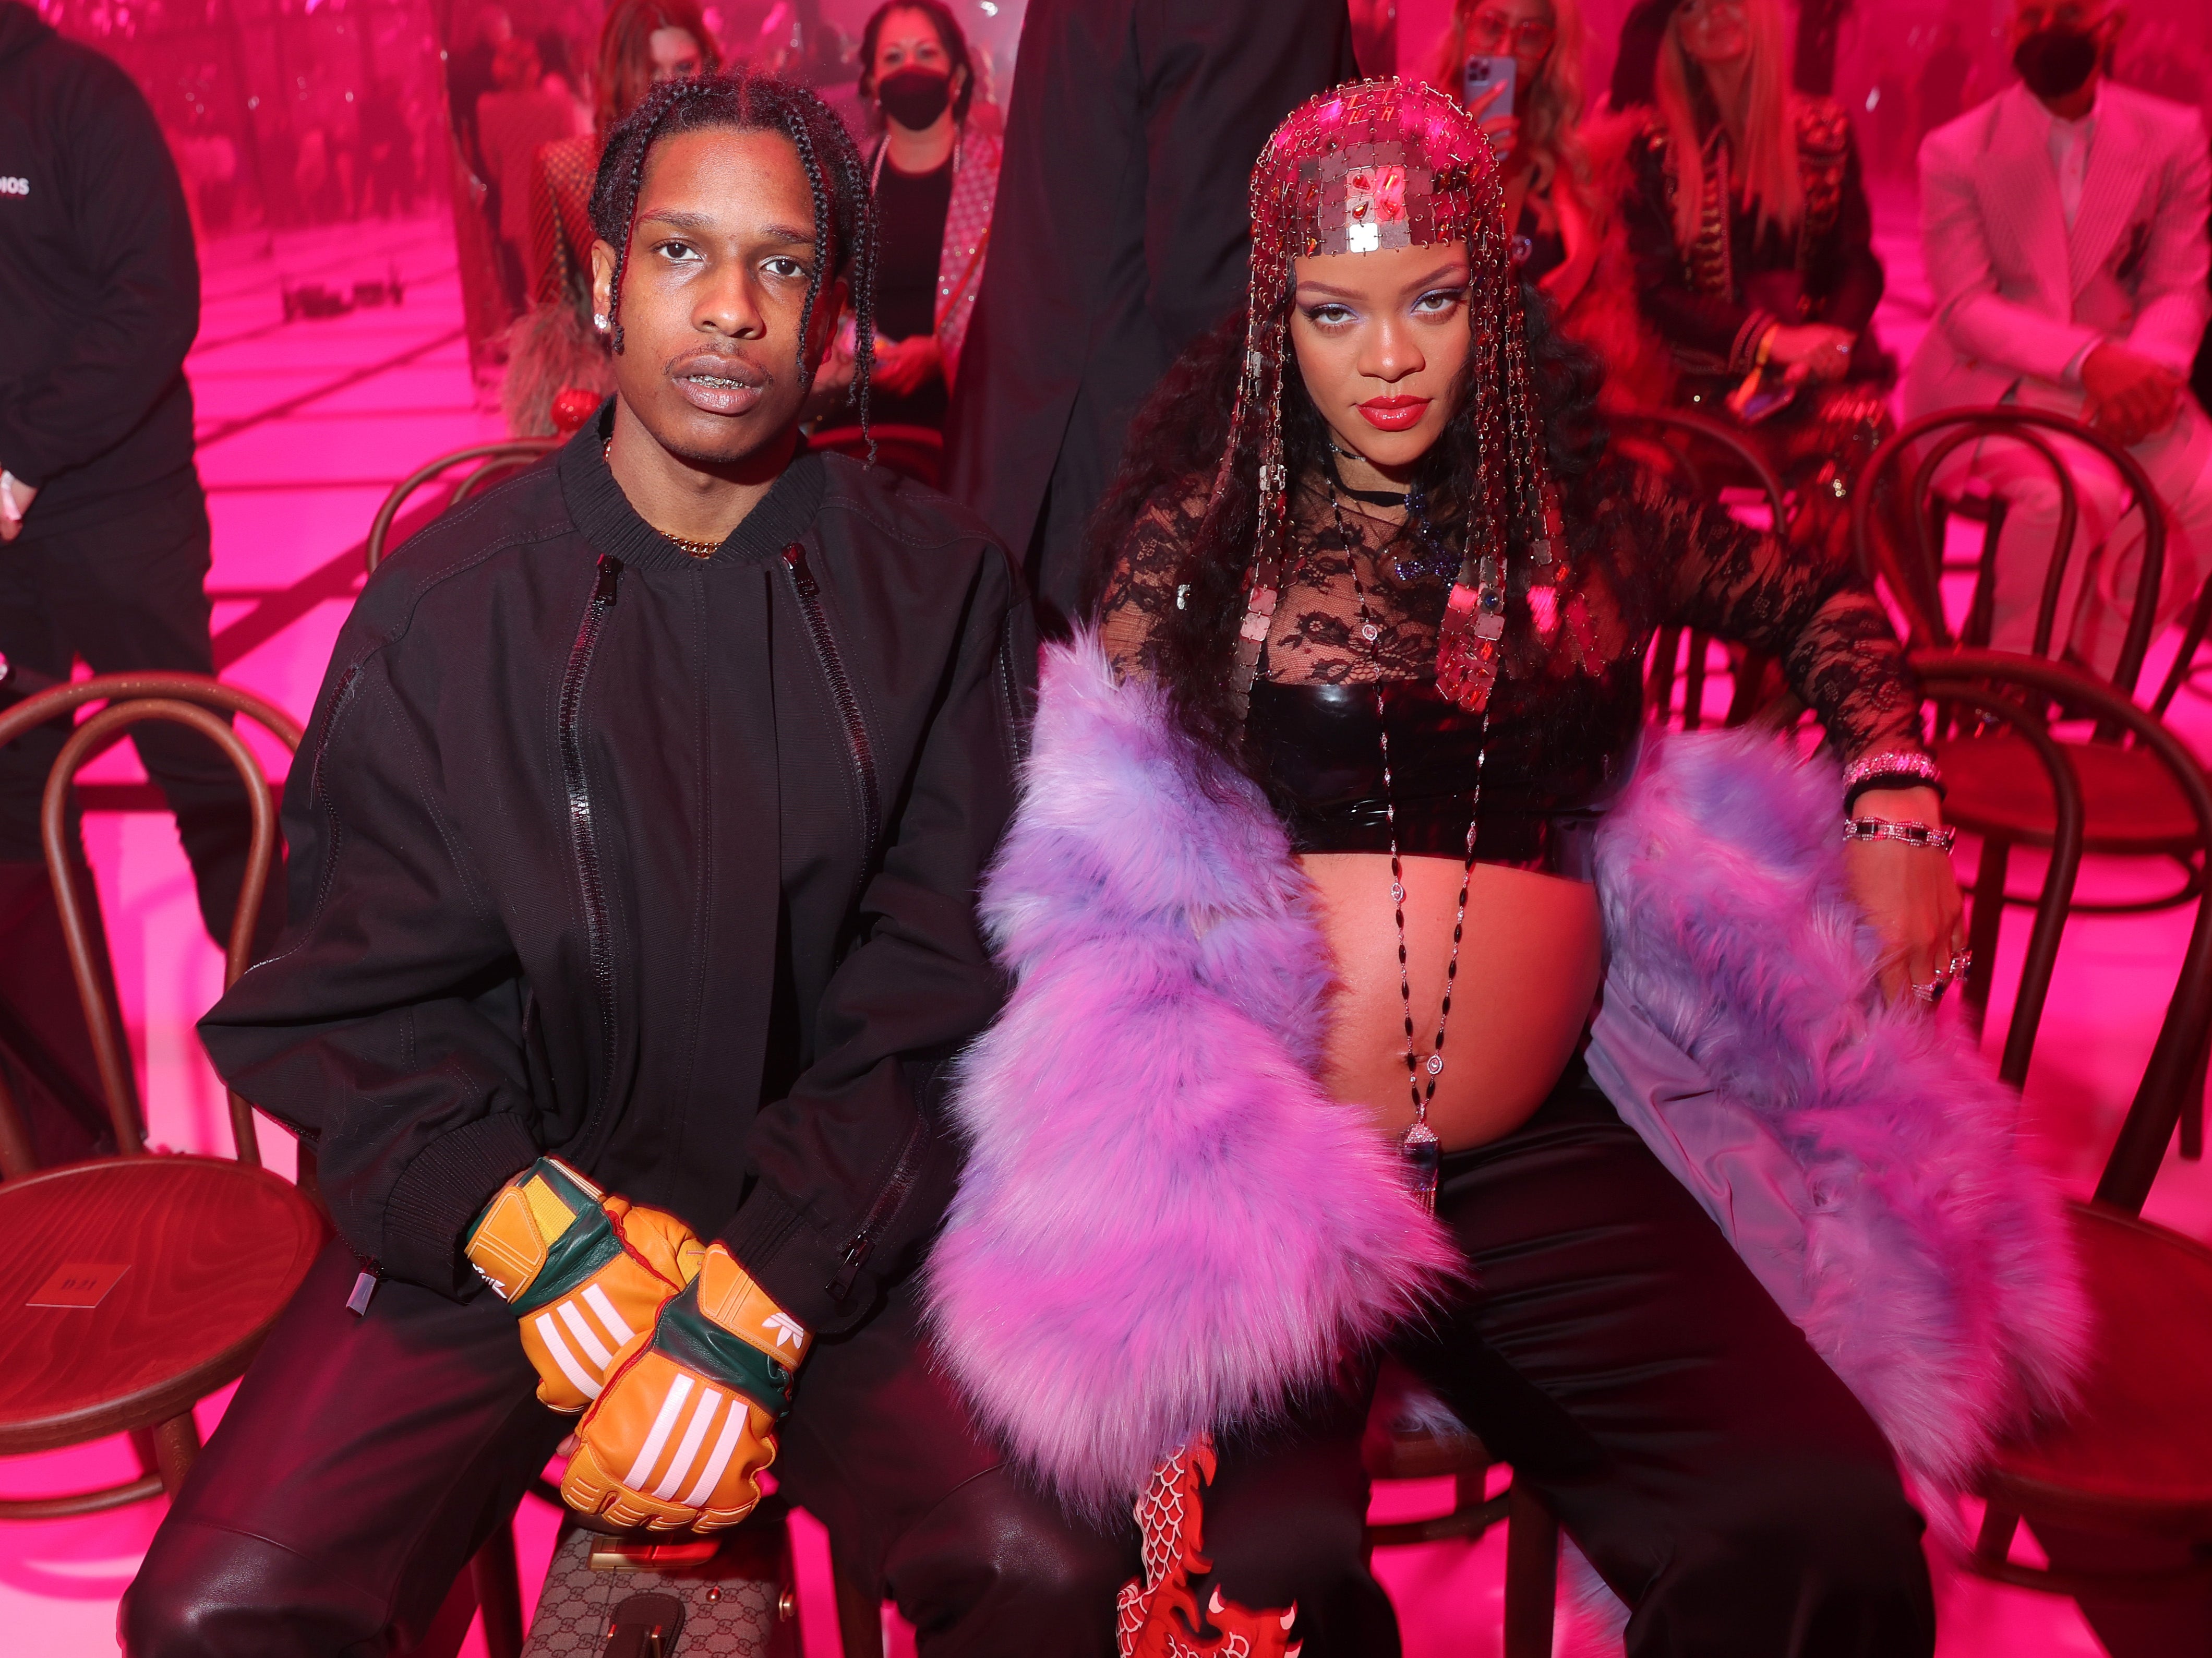 Rihanna attends Gucci show with A$AP Rocky